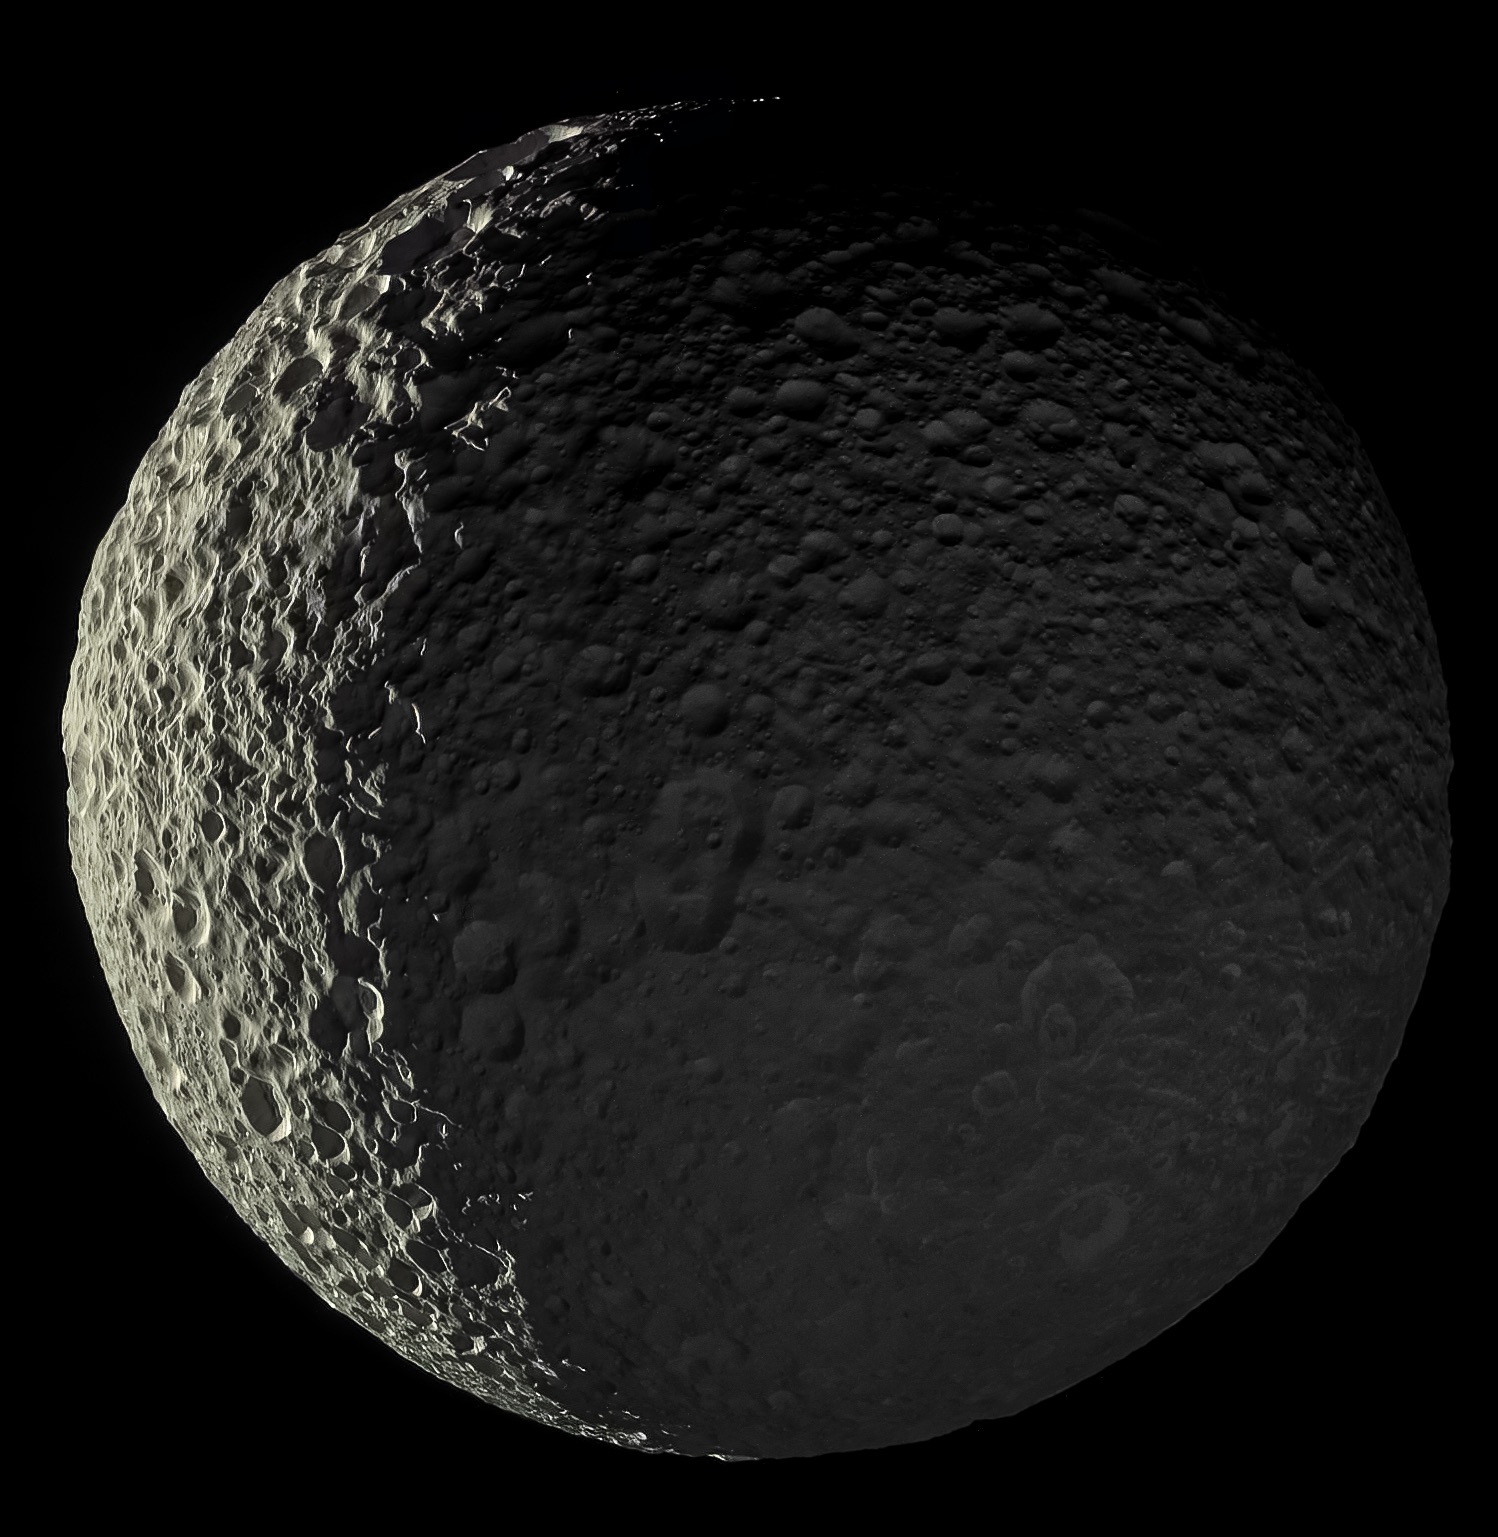 Even Tiny Mimas Seems to Have an Internal Ocean of Liquid Water